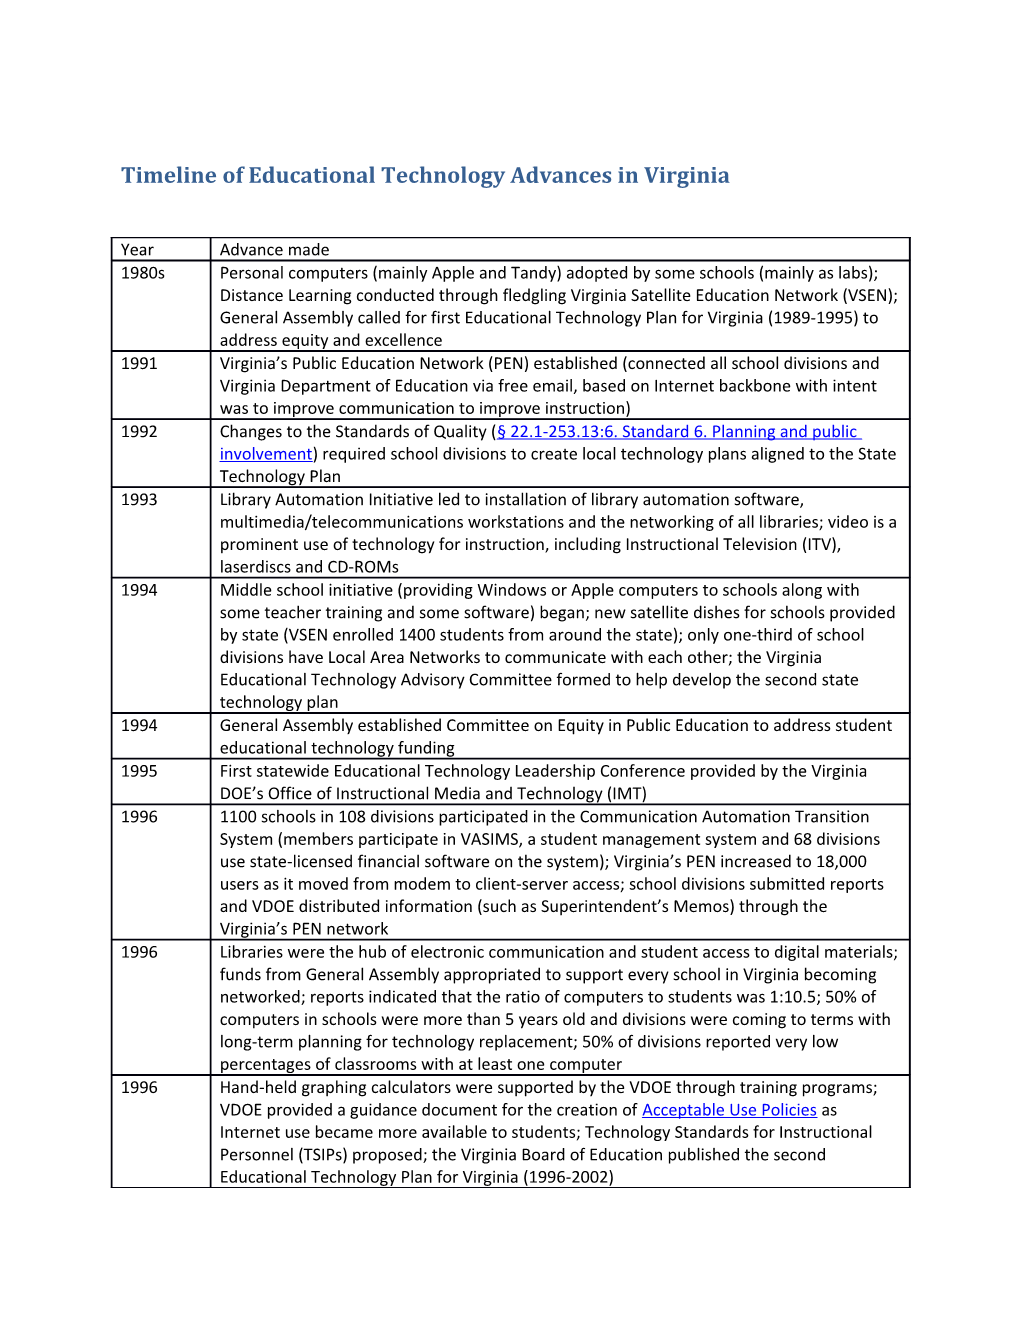 Timeline of Educational Technology Advances in Virginia